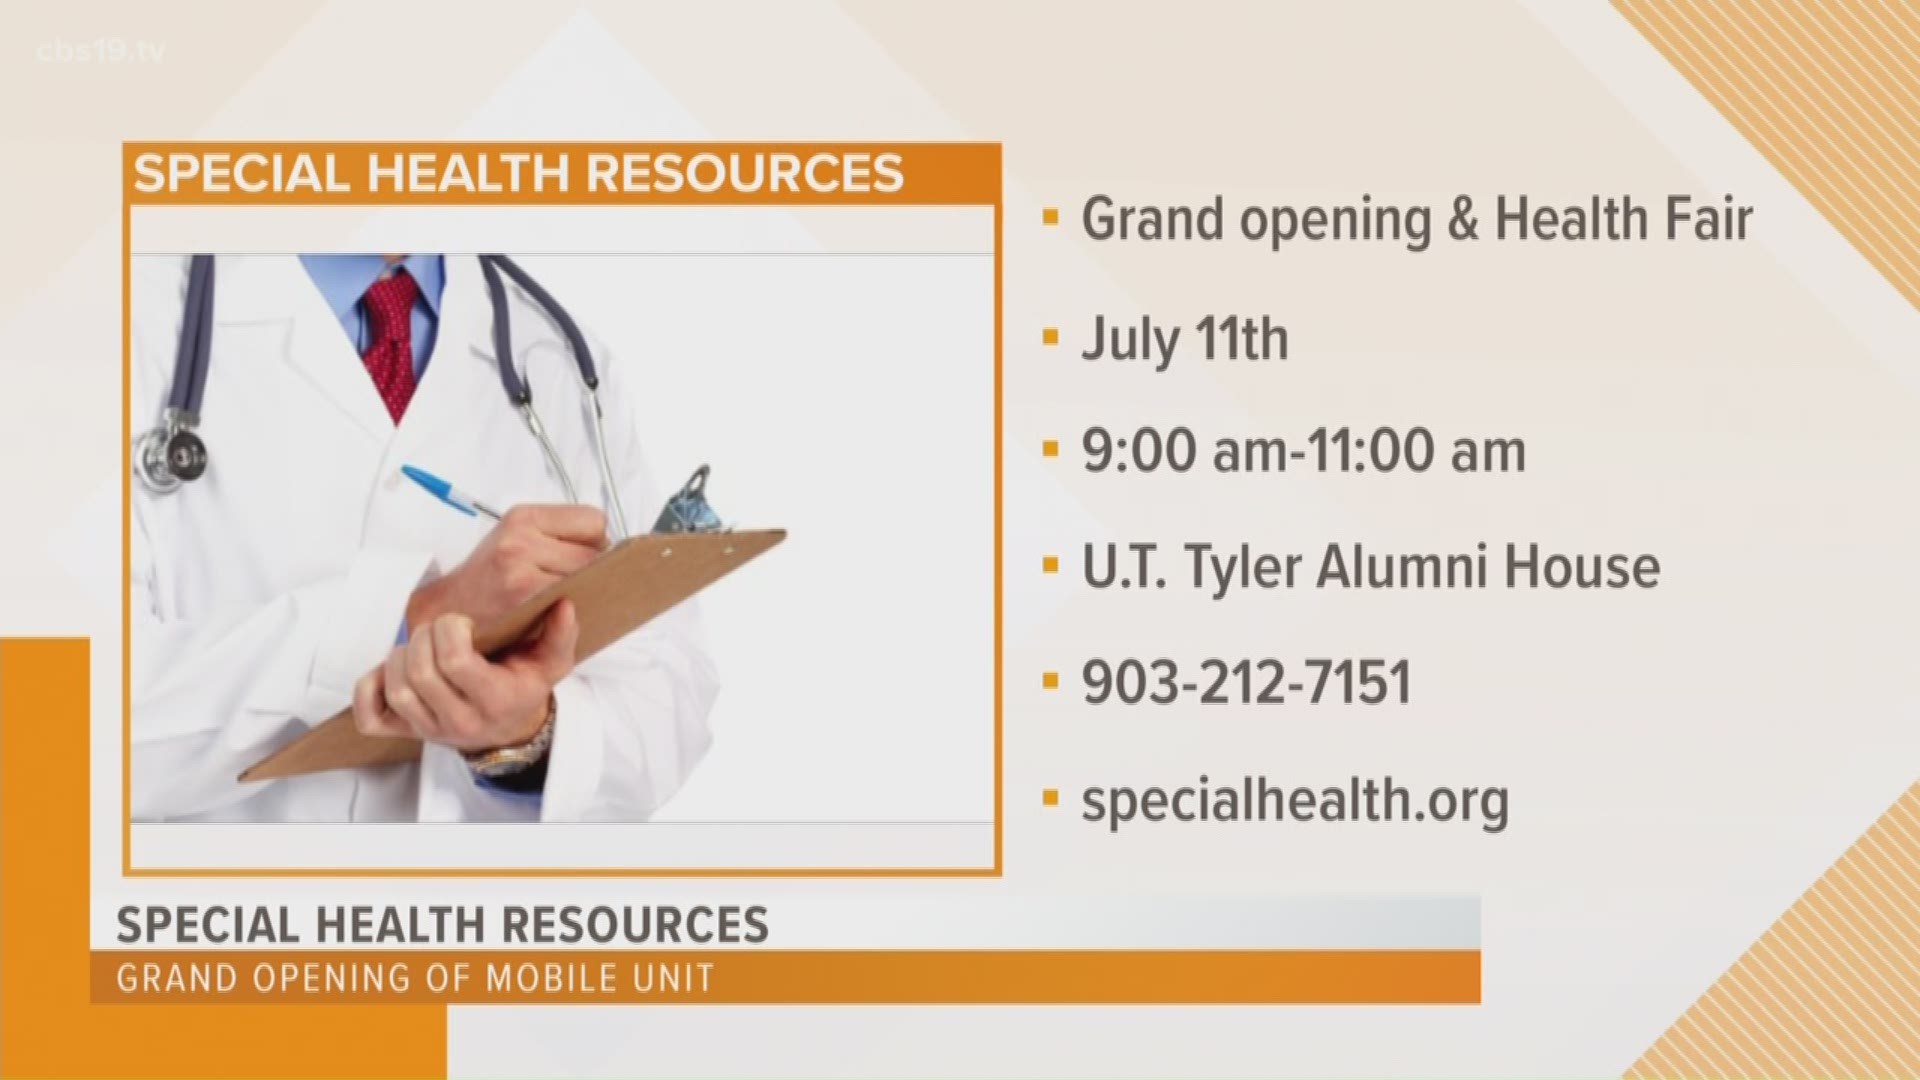 A mobile health unit, in partnership with UT Tyler and Special Health Resources, is open to the public beginning July 15.